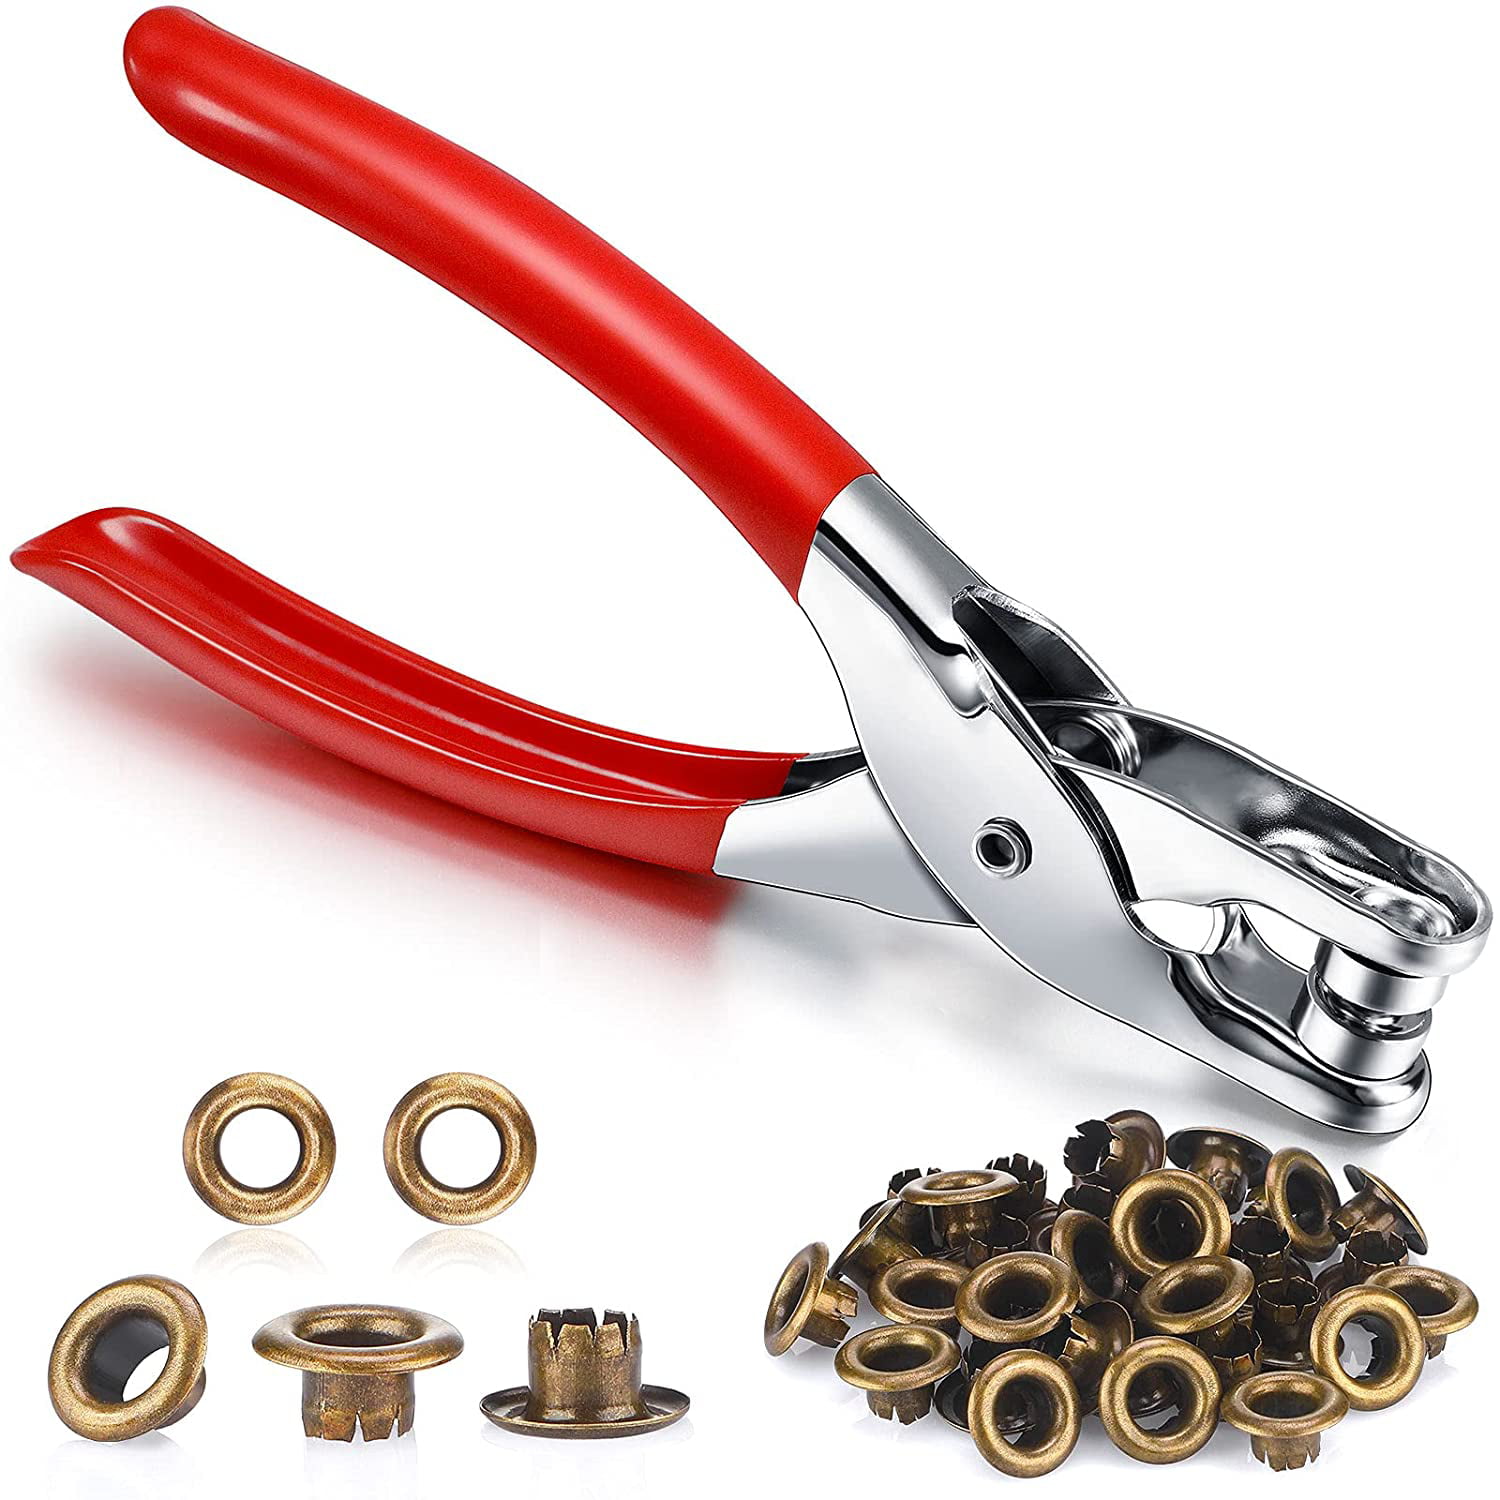 Kurtzy Eyelet Hole Punch Pliers Kit With 100 Eyelets 16cm/6.3 Inch Leather  Belt Grommet Tool 